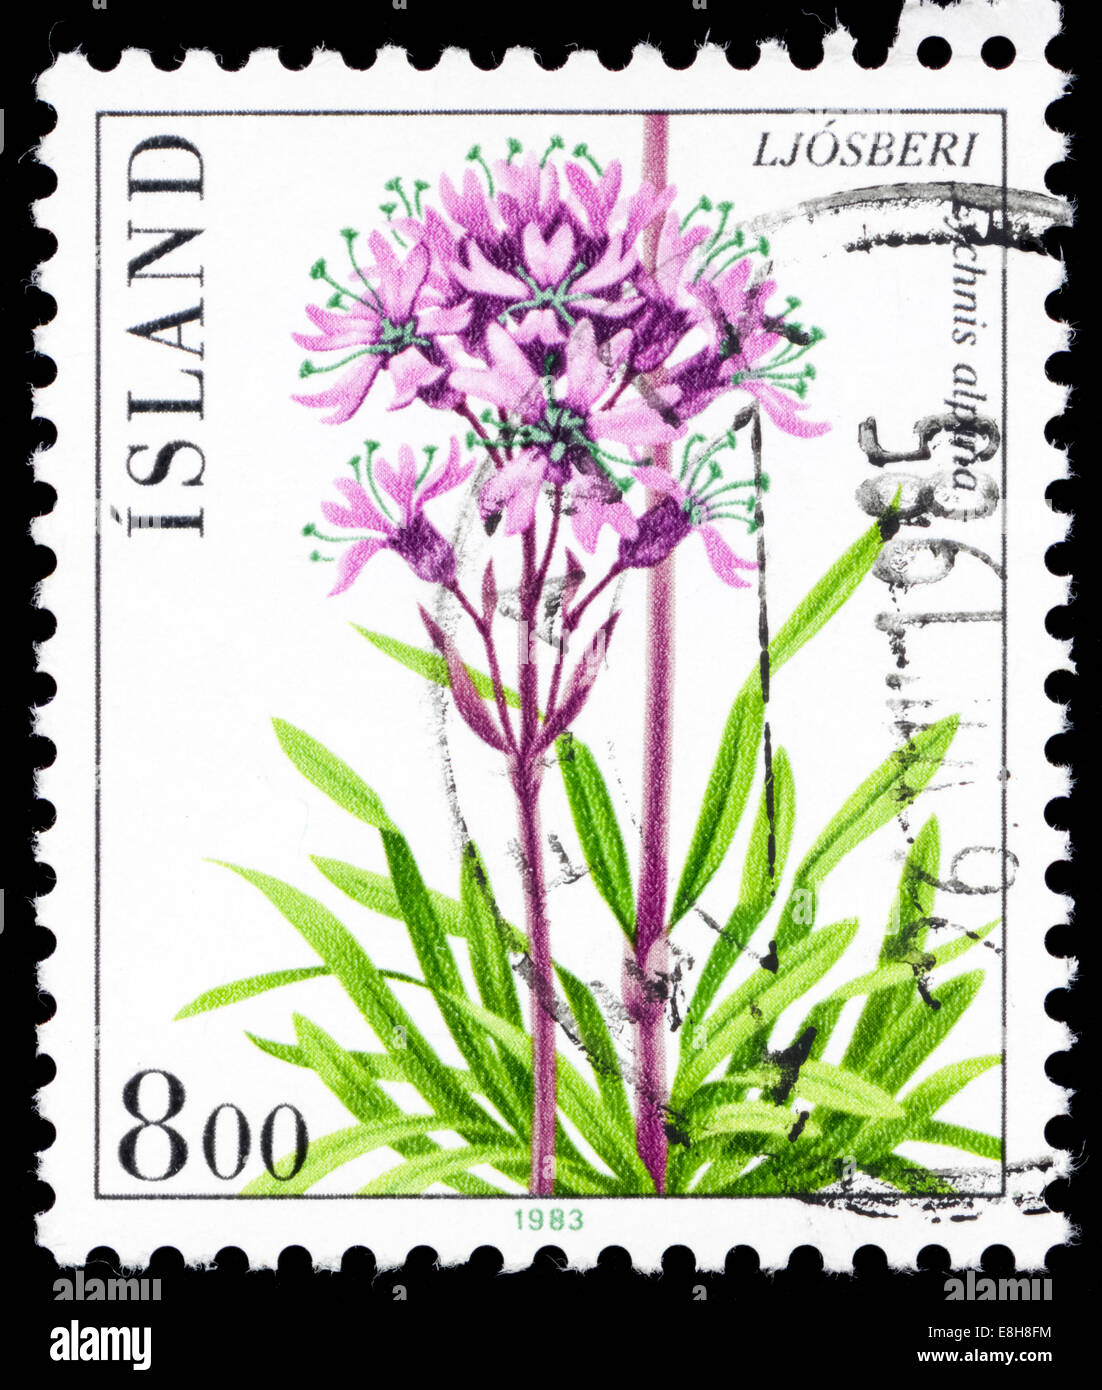 Postmarked stamp from Iceland in the Flowers series issued in 1983 Stock Photo